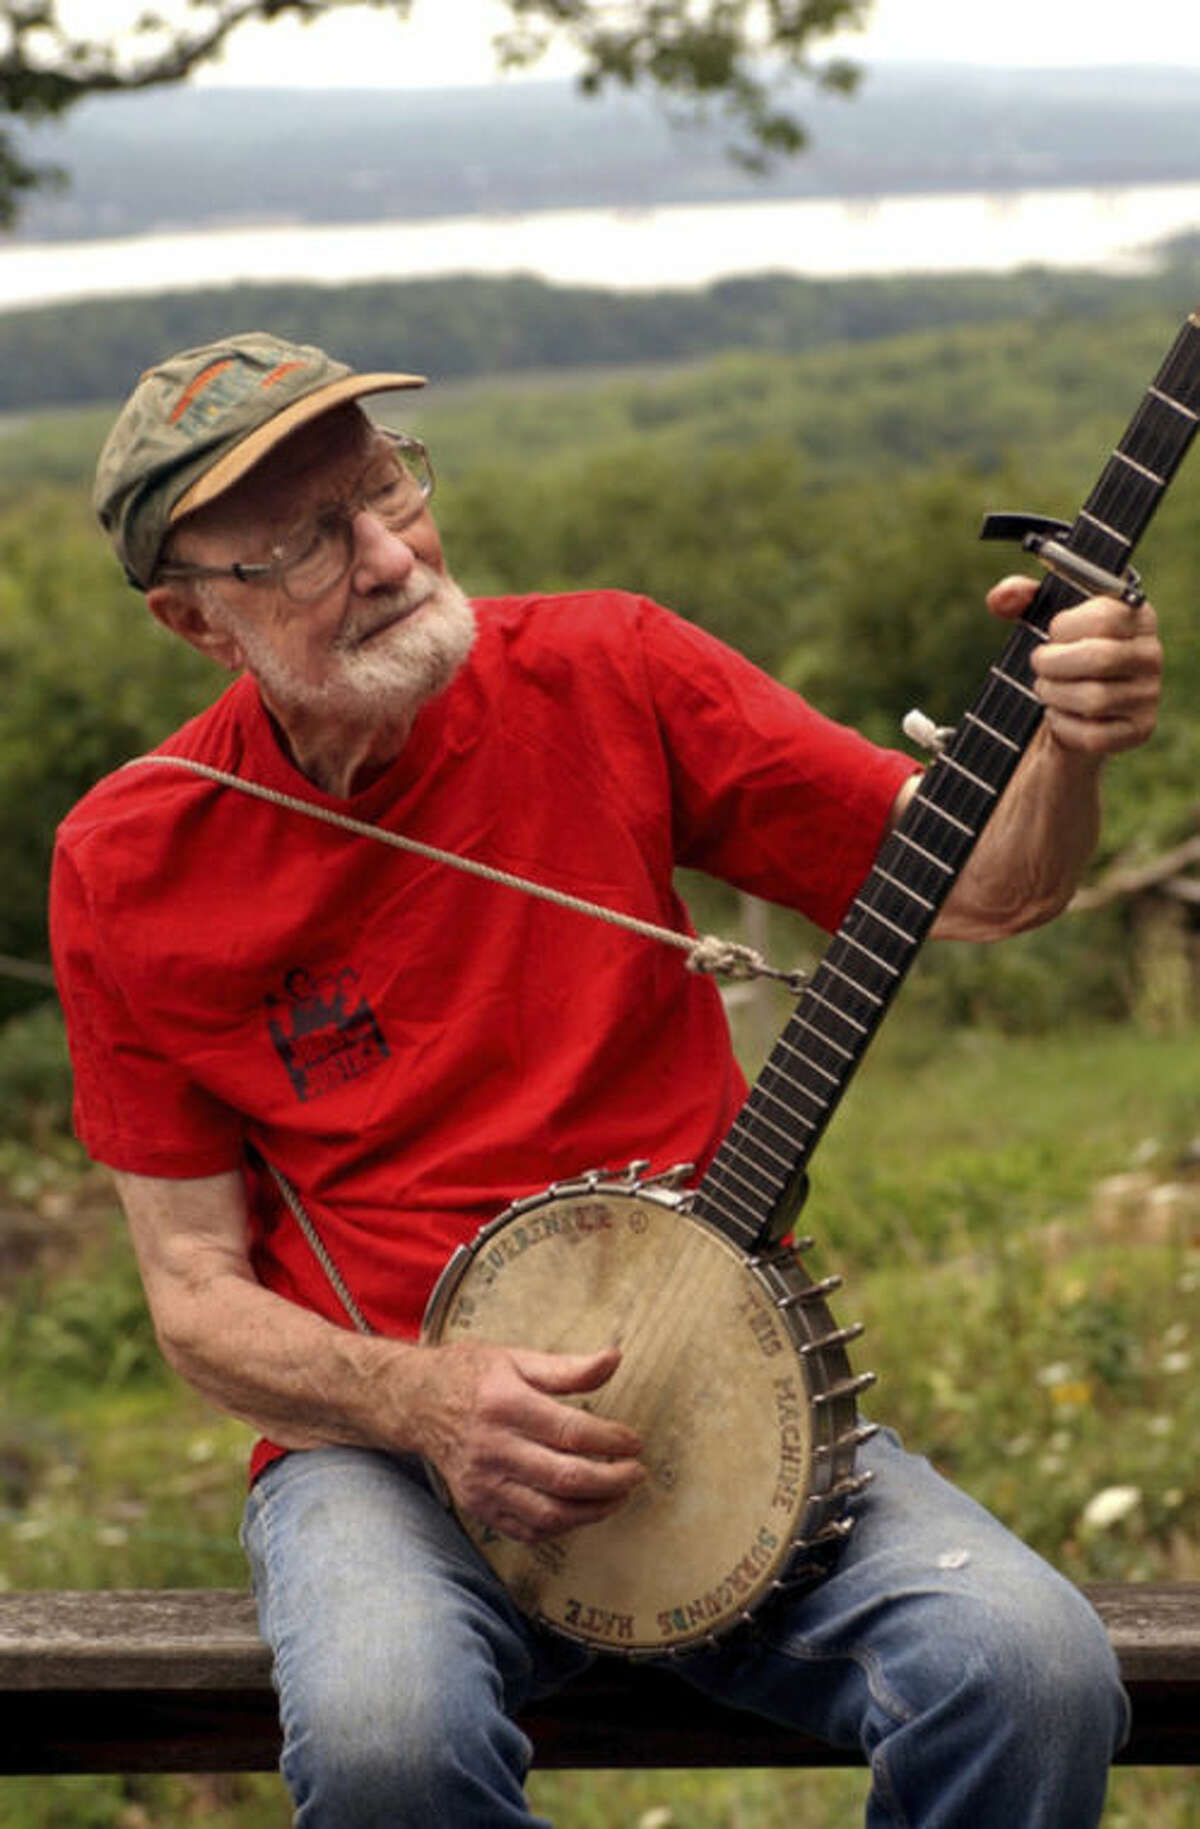 FILE - In this Tuesday, July 27, 2004 file photo, Pete Seeger, 85, sits on his porch above the Hudson River at Beacon, N.Y. and plays a Woody Guthrie song on his banjo. Seeger died on Monday Jan. 27, 2014, at the age of 94. (AP Photo/Jim McKnight)